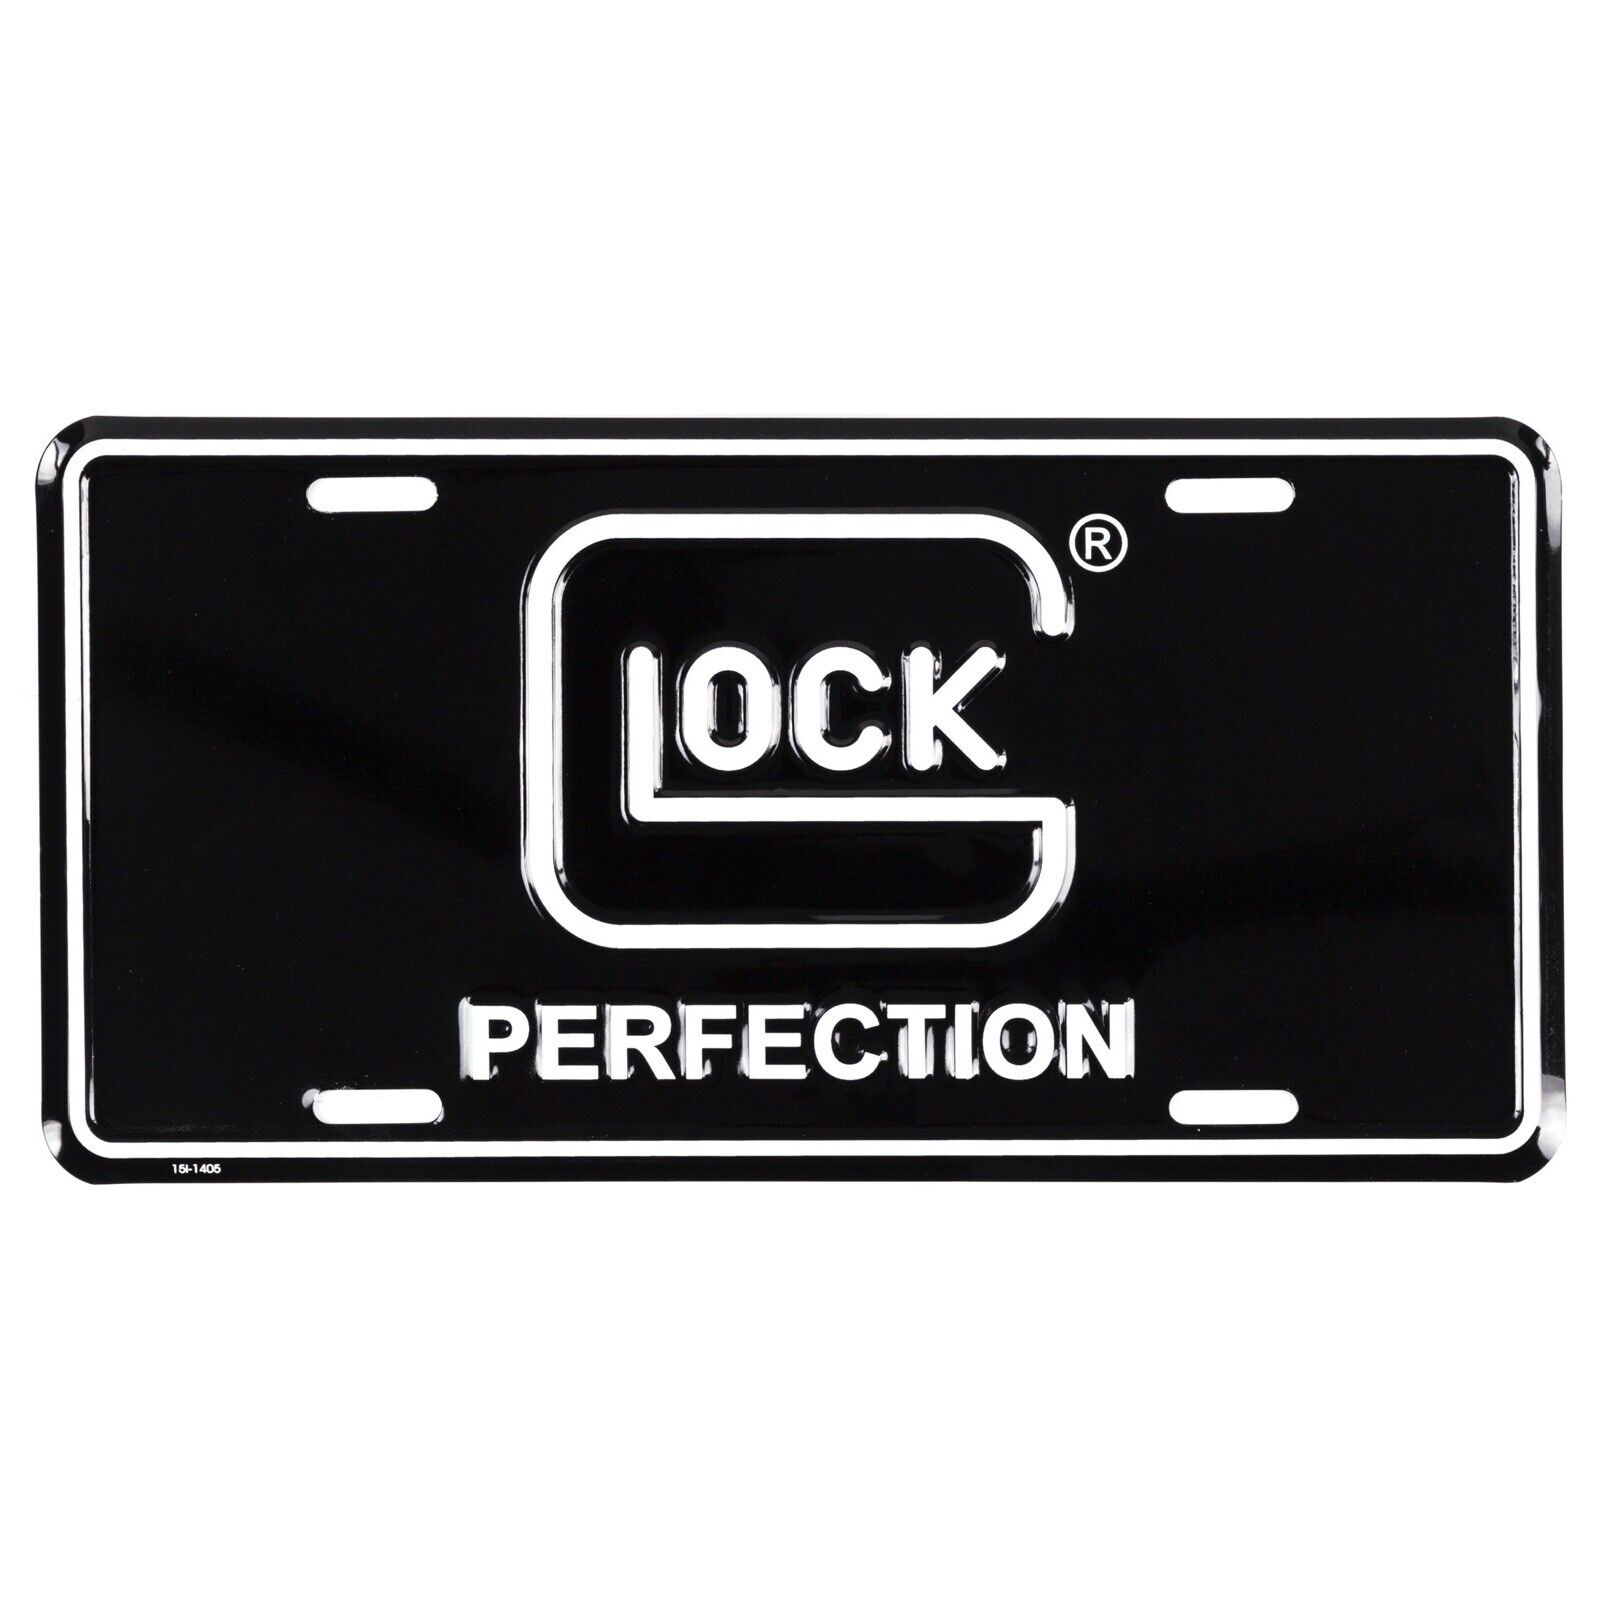 Officially Licensed NEW Glock Perfection License Plate, Black with White Letters